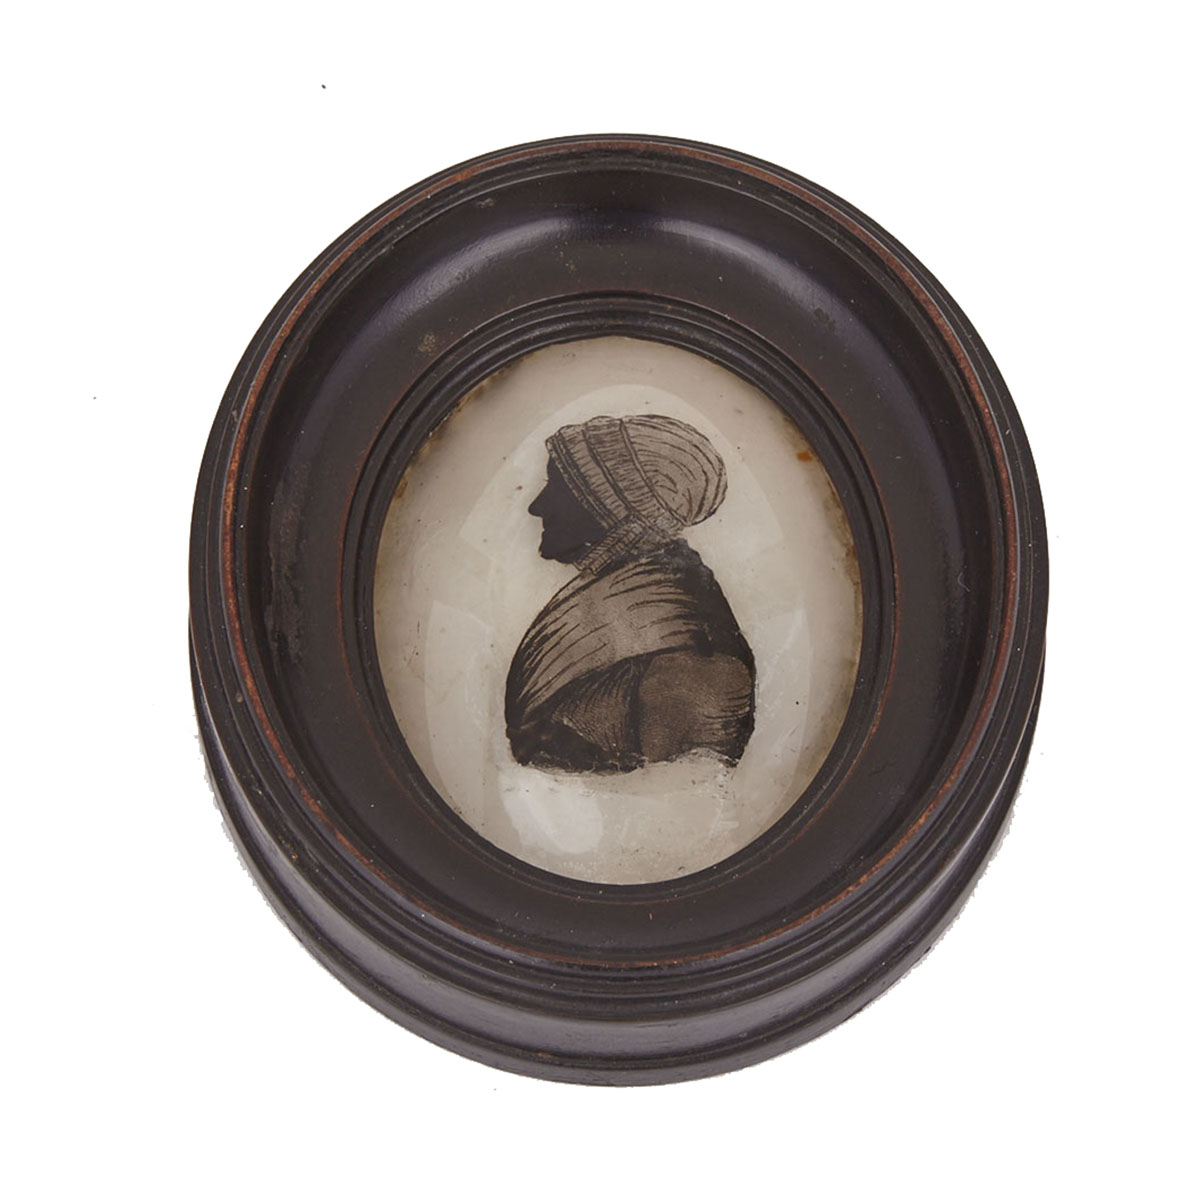 English Silhouette on Wax Backed Convex Glass of an Elderly Lady, early 19th century